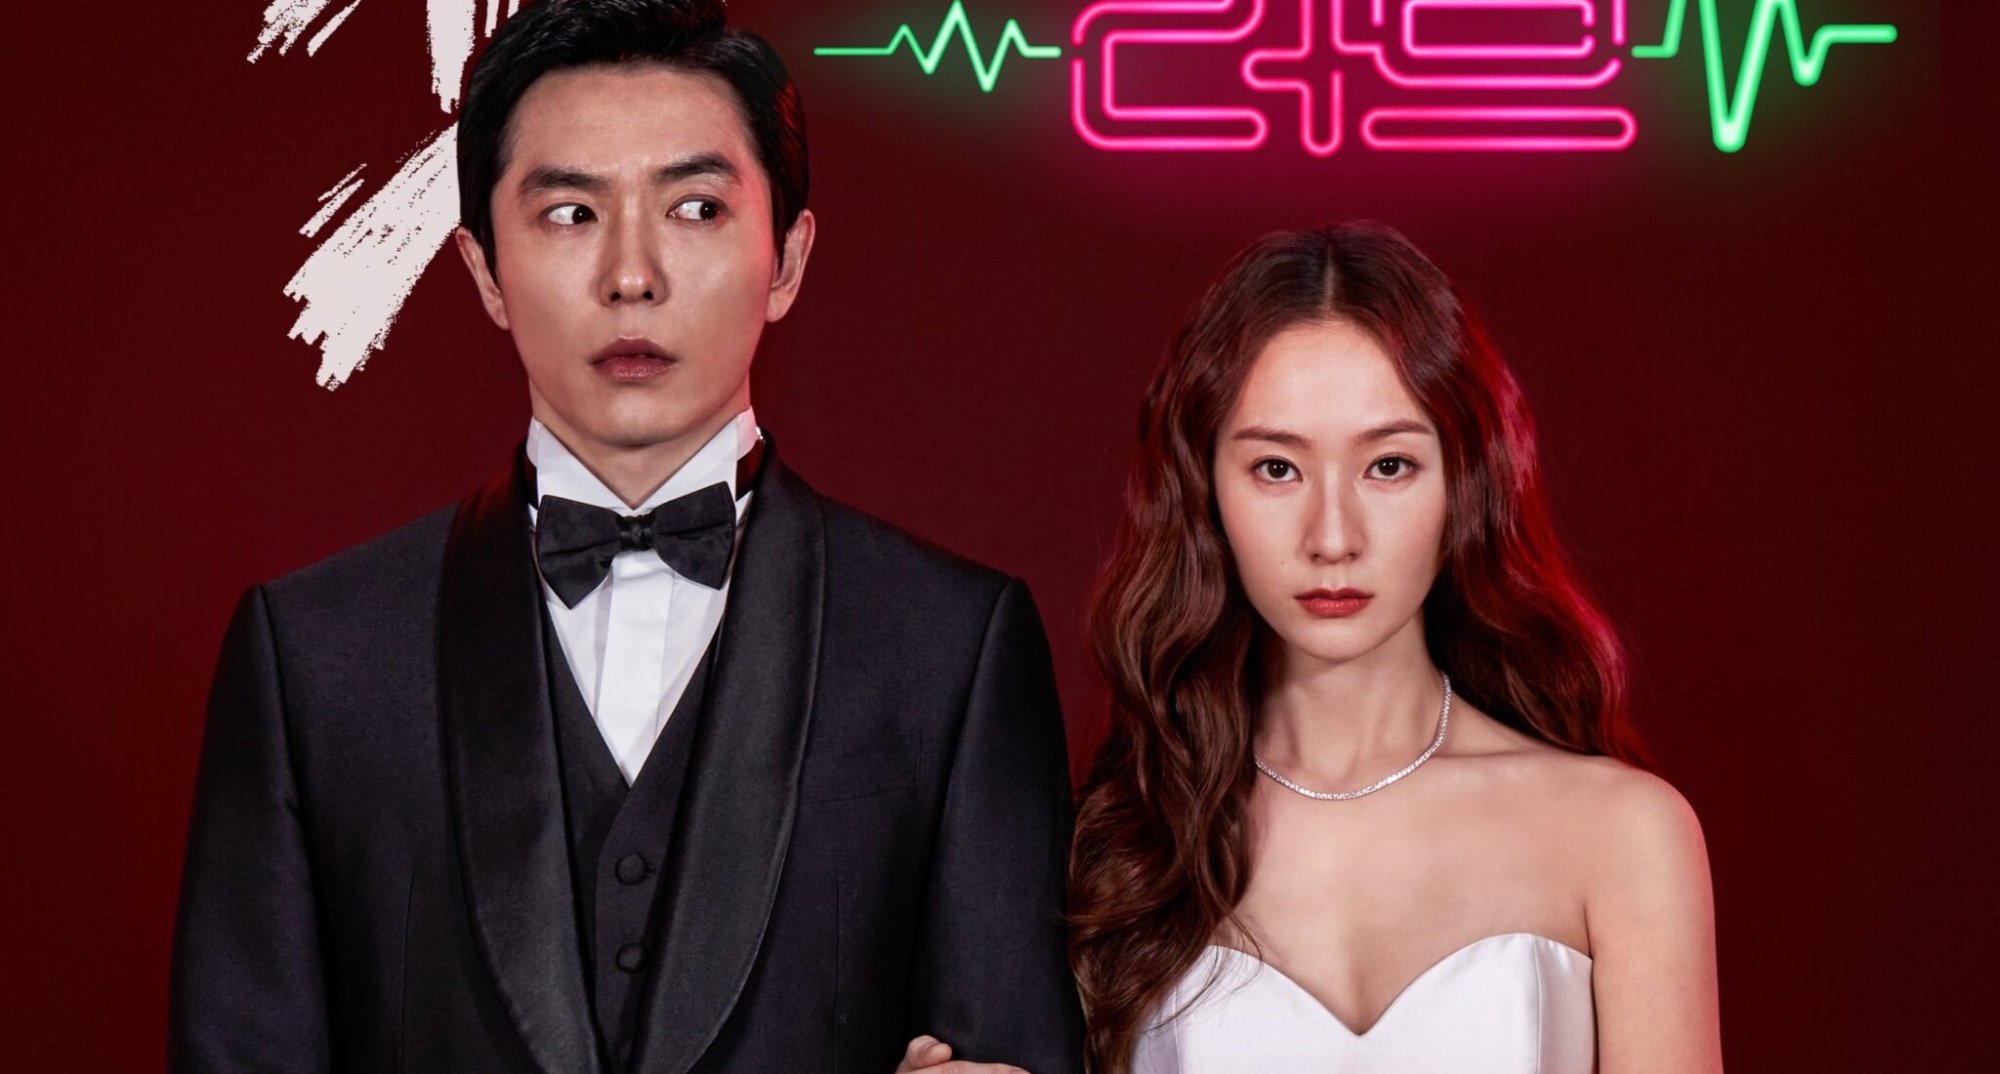 Kim Jae-wook and Krystal Jung for 'Crazy Love' K-drama on Disney+ wearing tux and wedding dress.